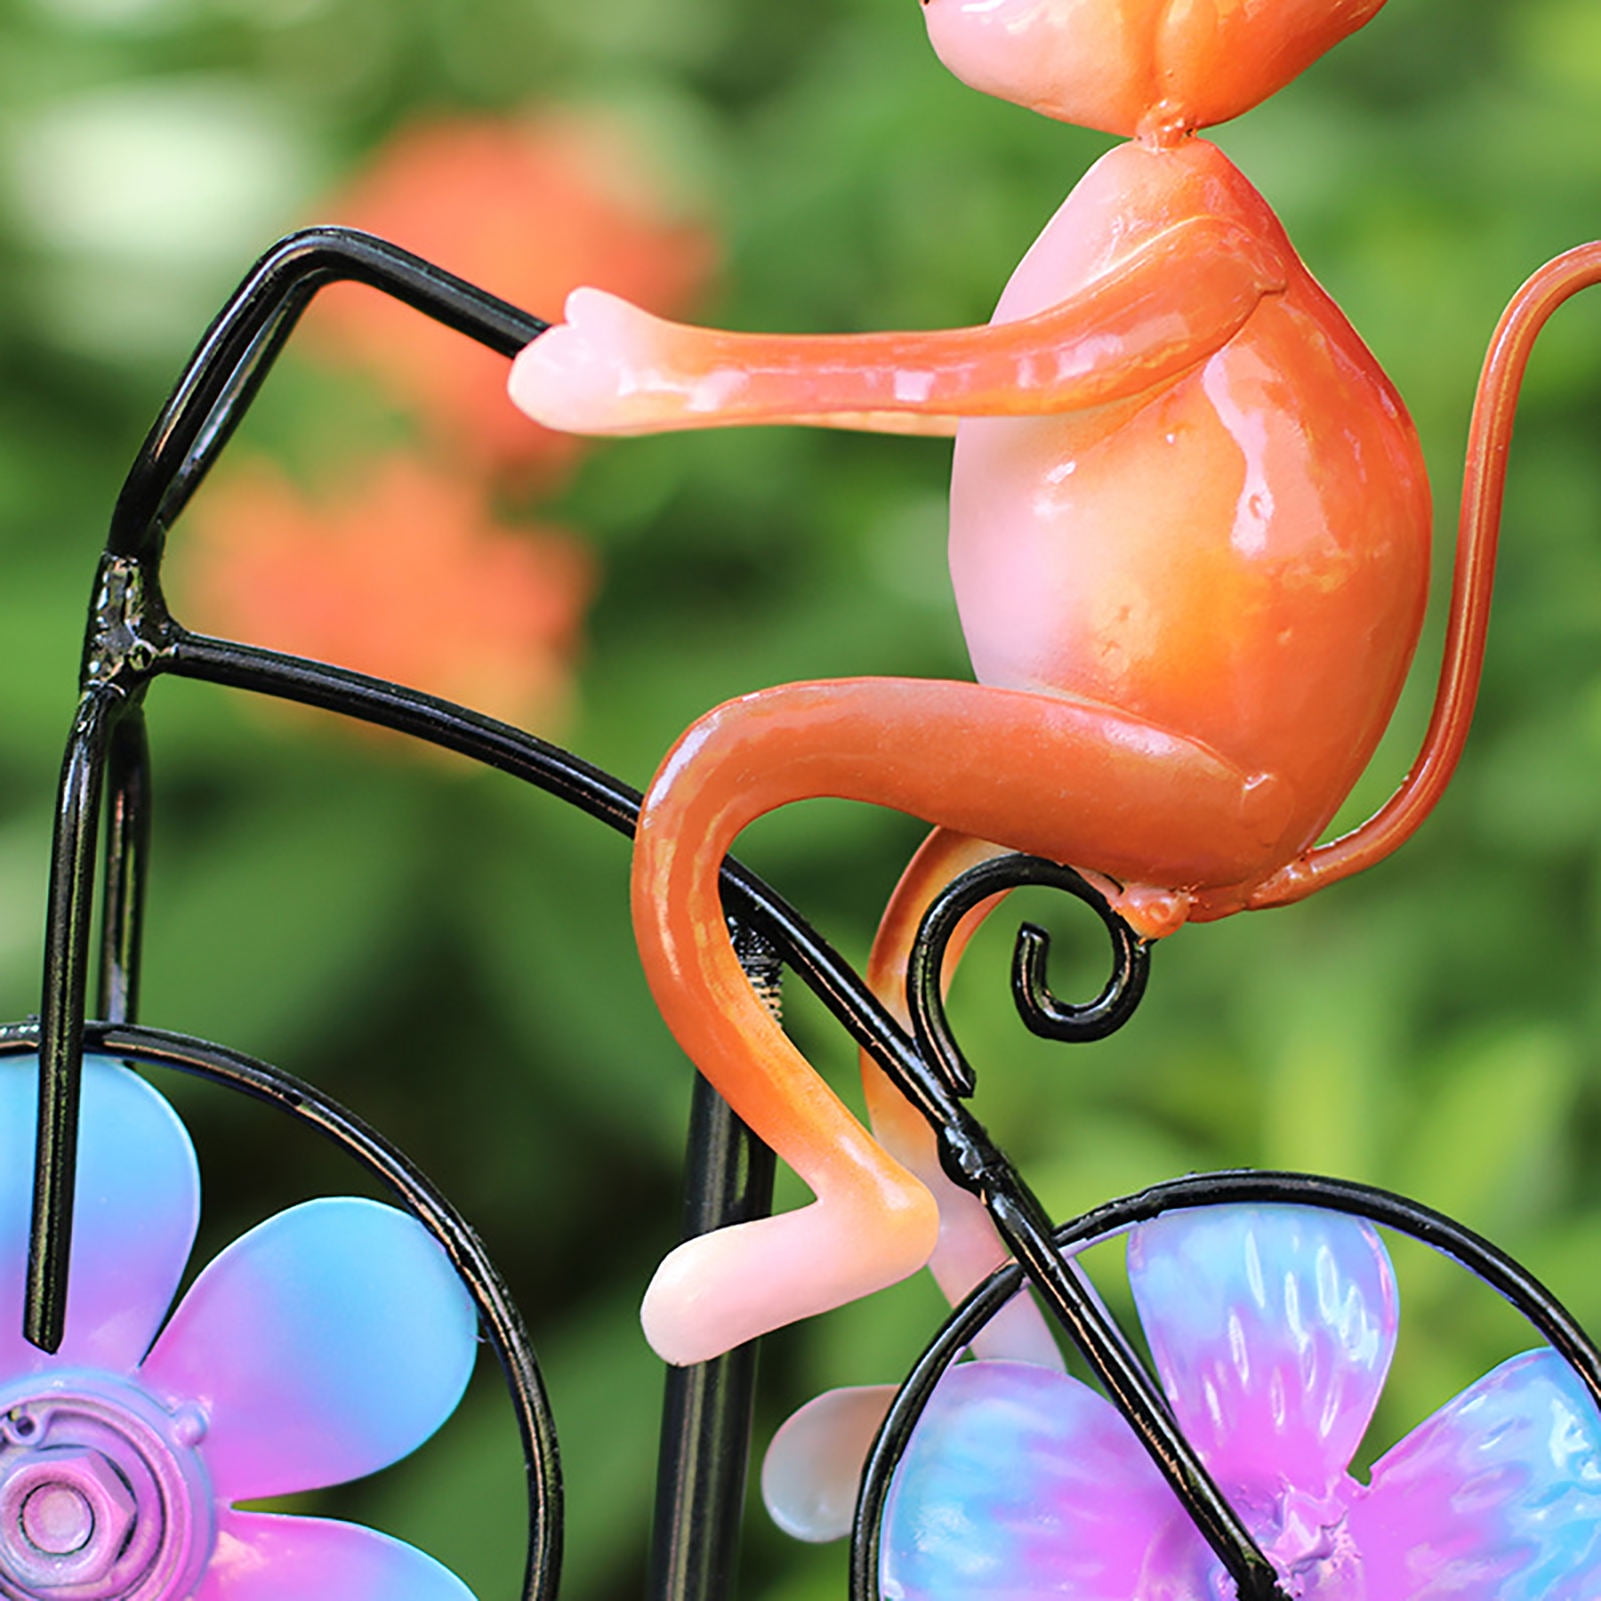 Monkey on a Bicycle Wind Spinner..24... PR 26709 